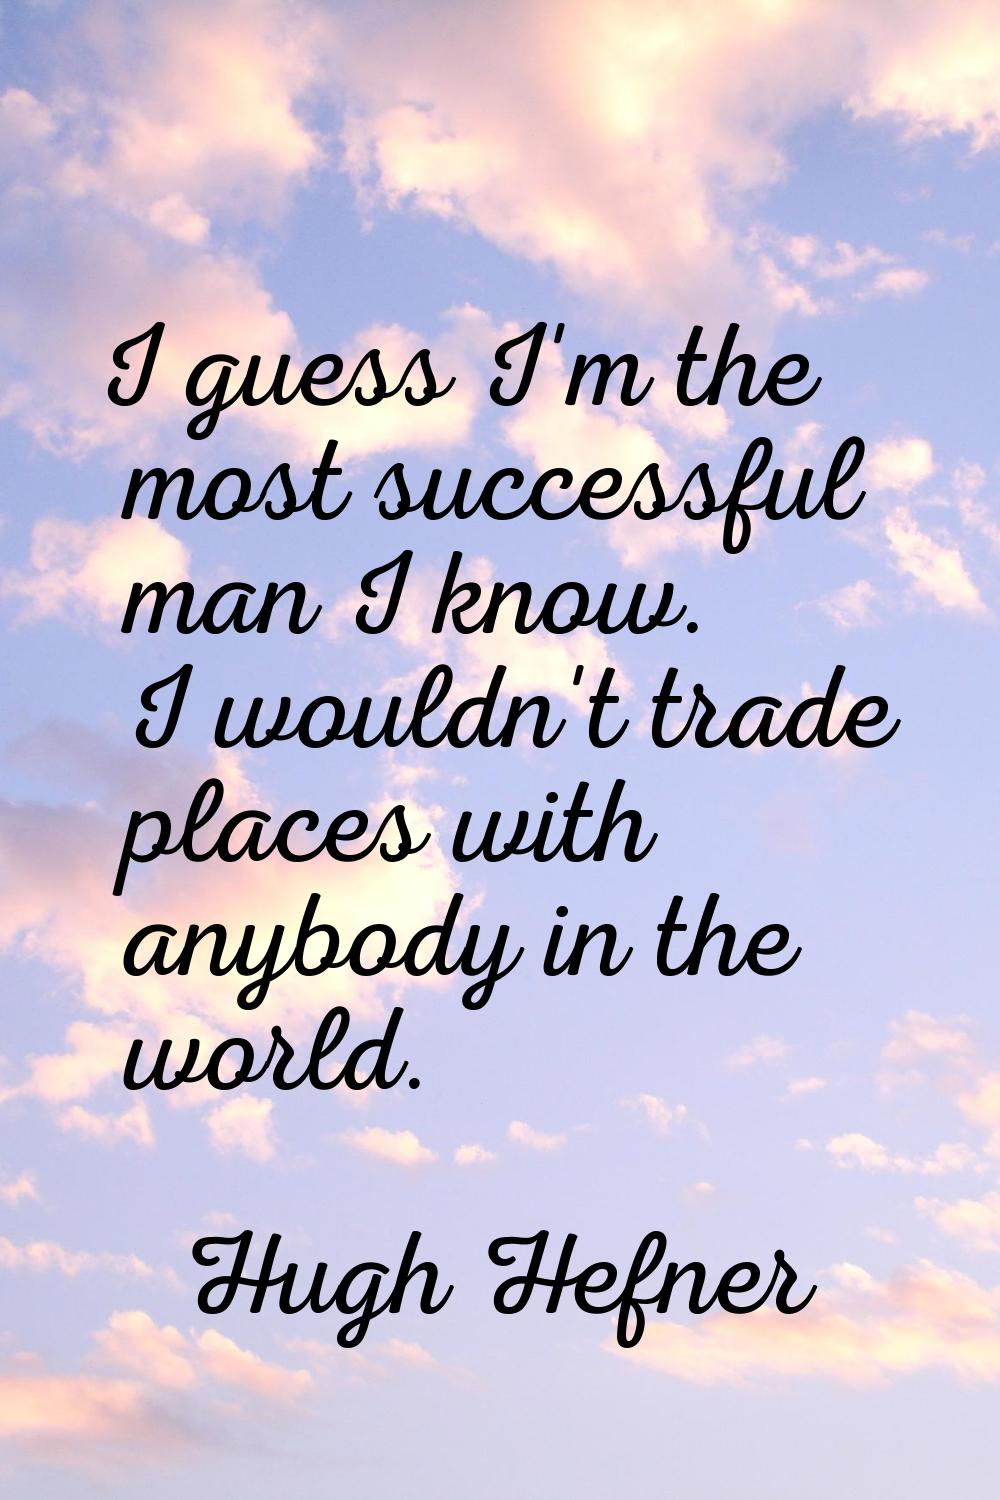 I guess I'm the most successful man I know. I wouldn't trade places with anybody in the world.